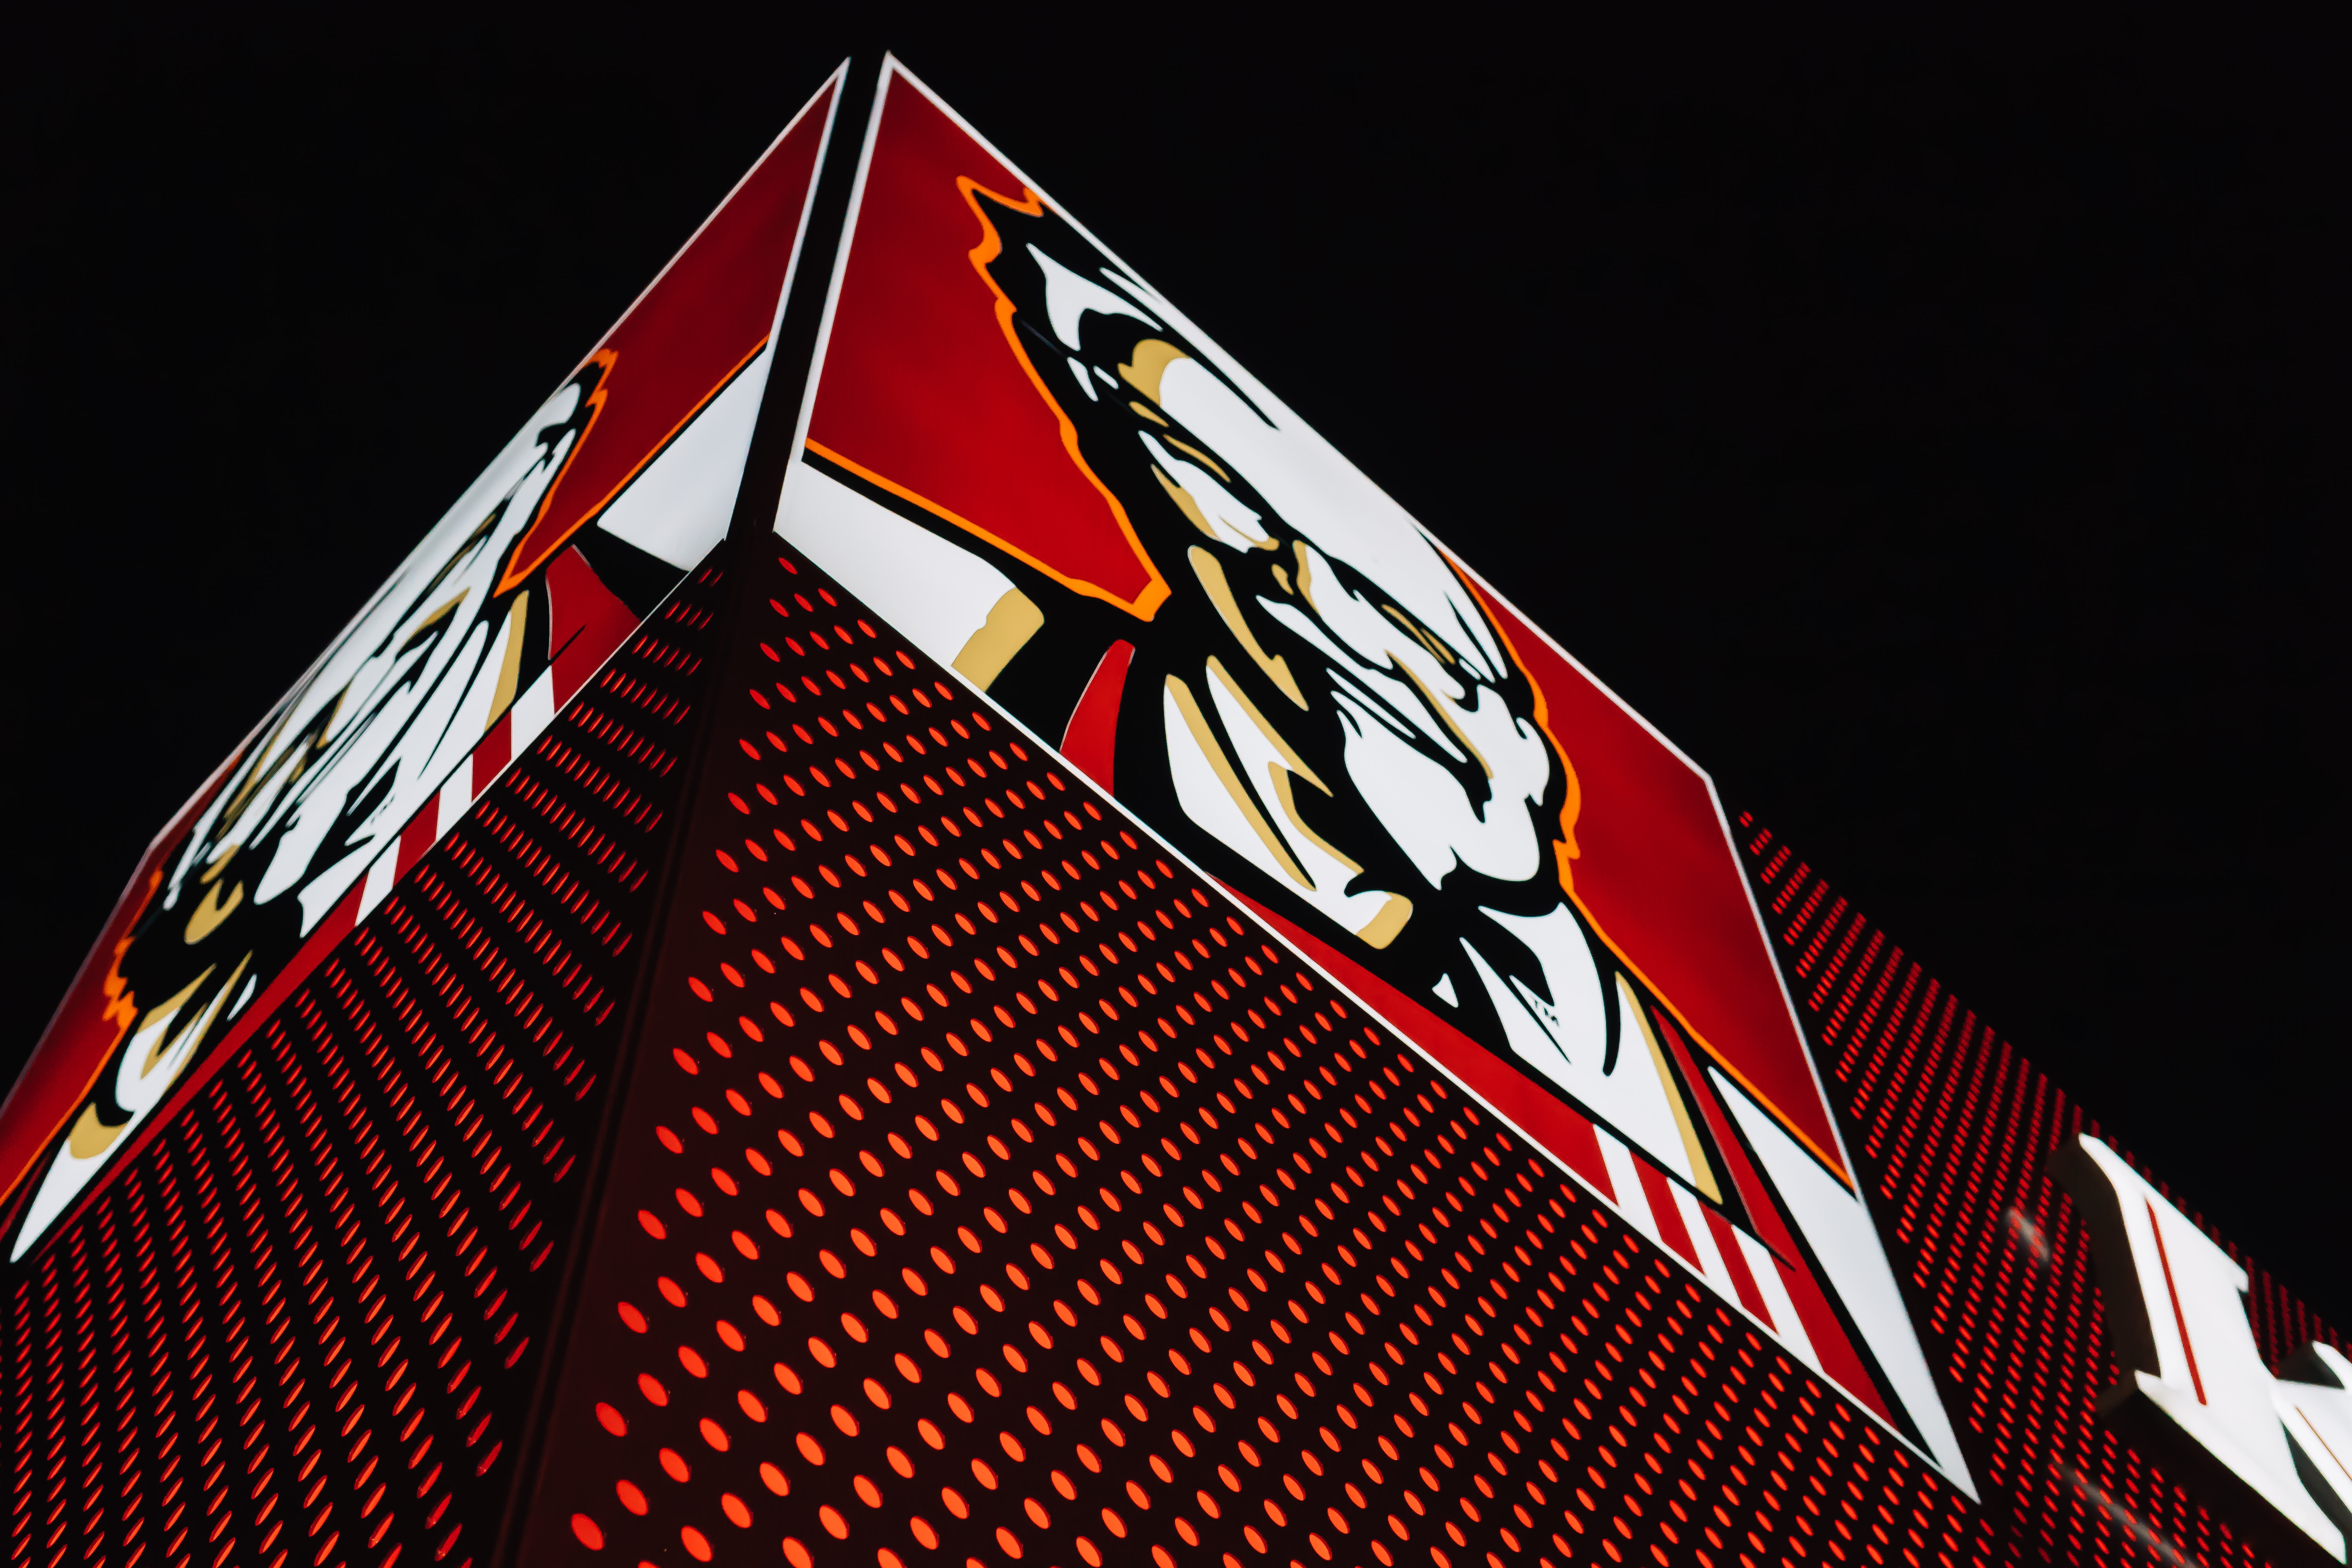 Supply Chain Scene, image of a lighted KFC sign on a corner building 